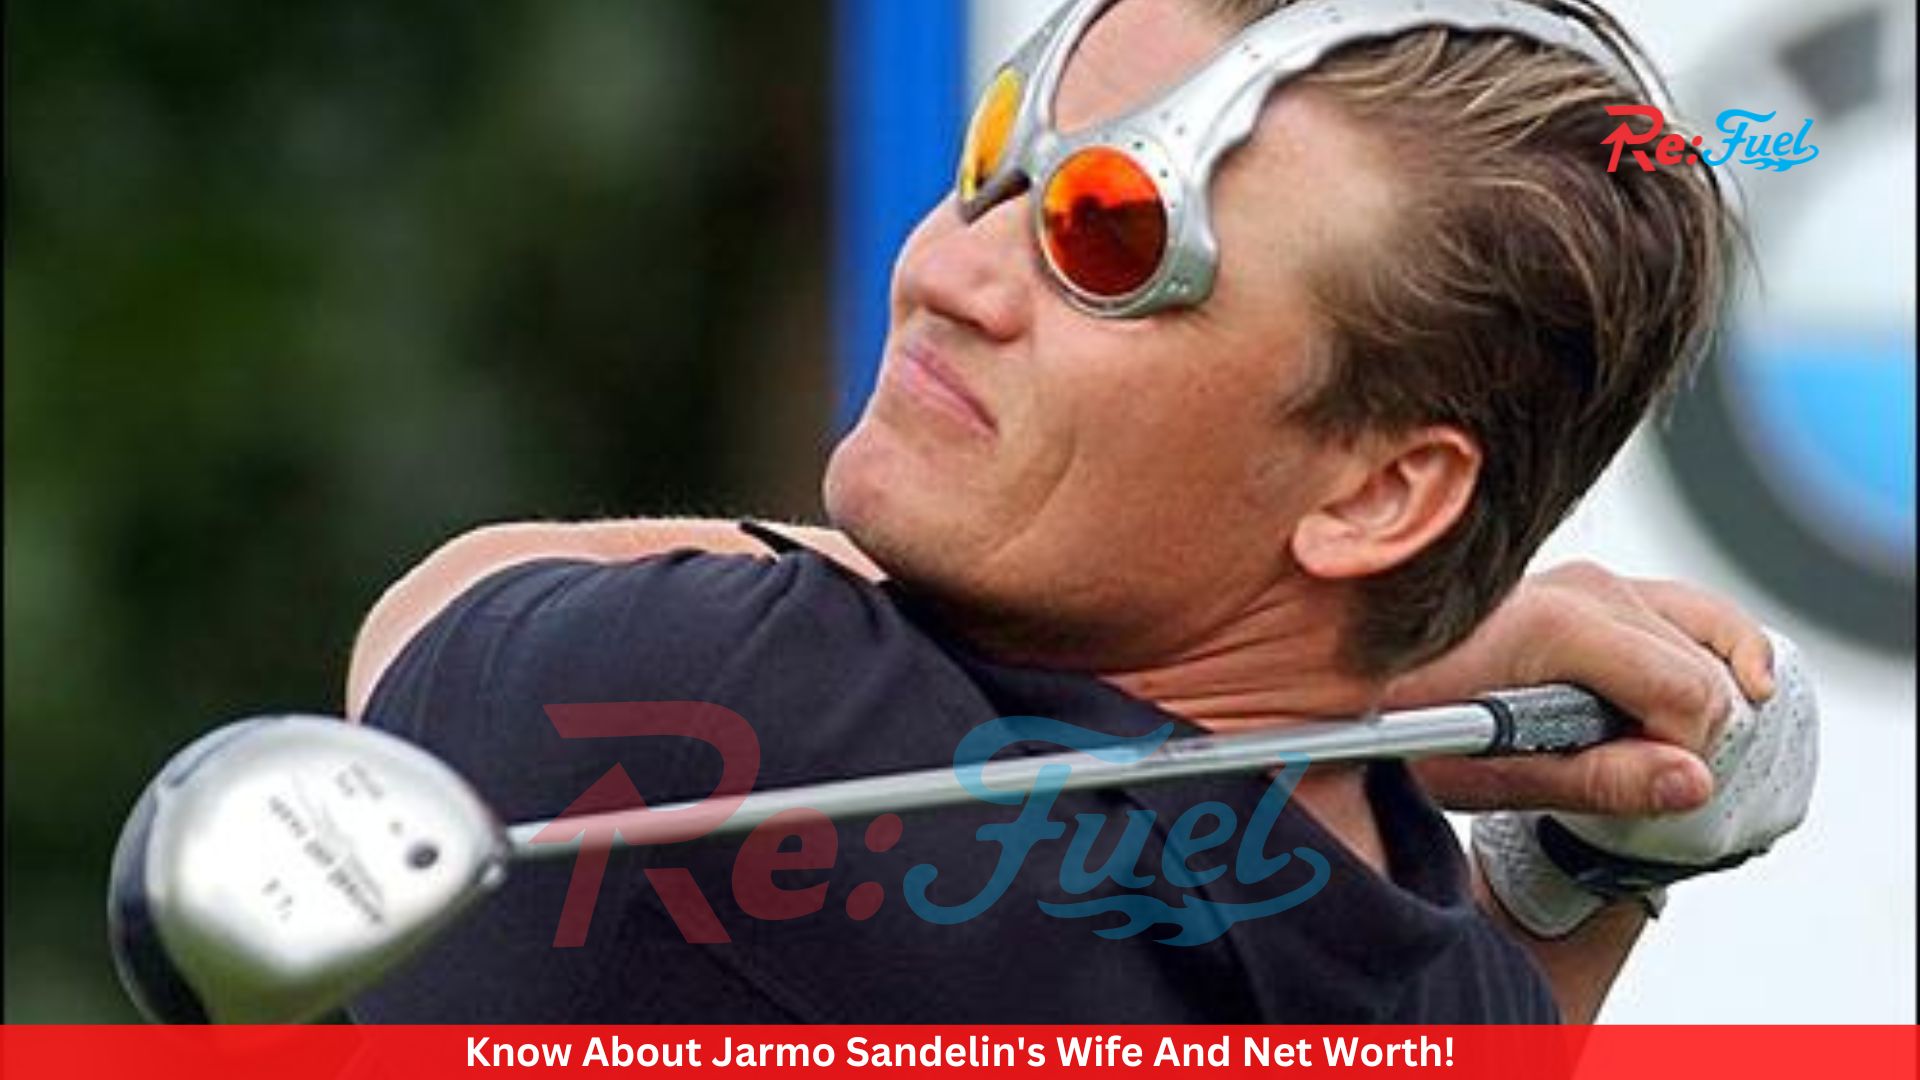 Know About Jarmo Sandelin's Wife And Net Worth!